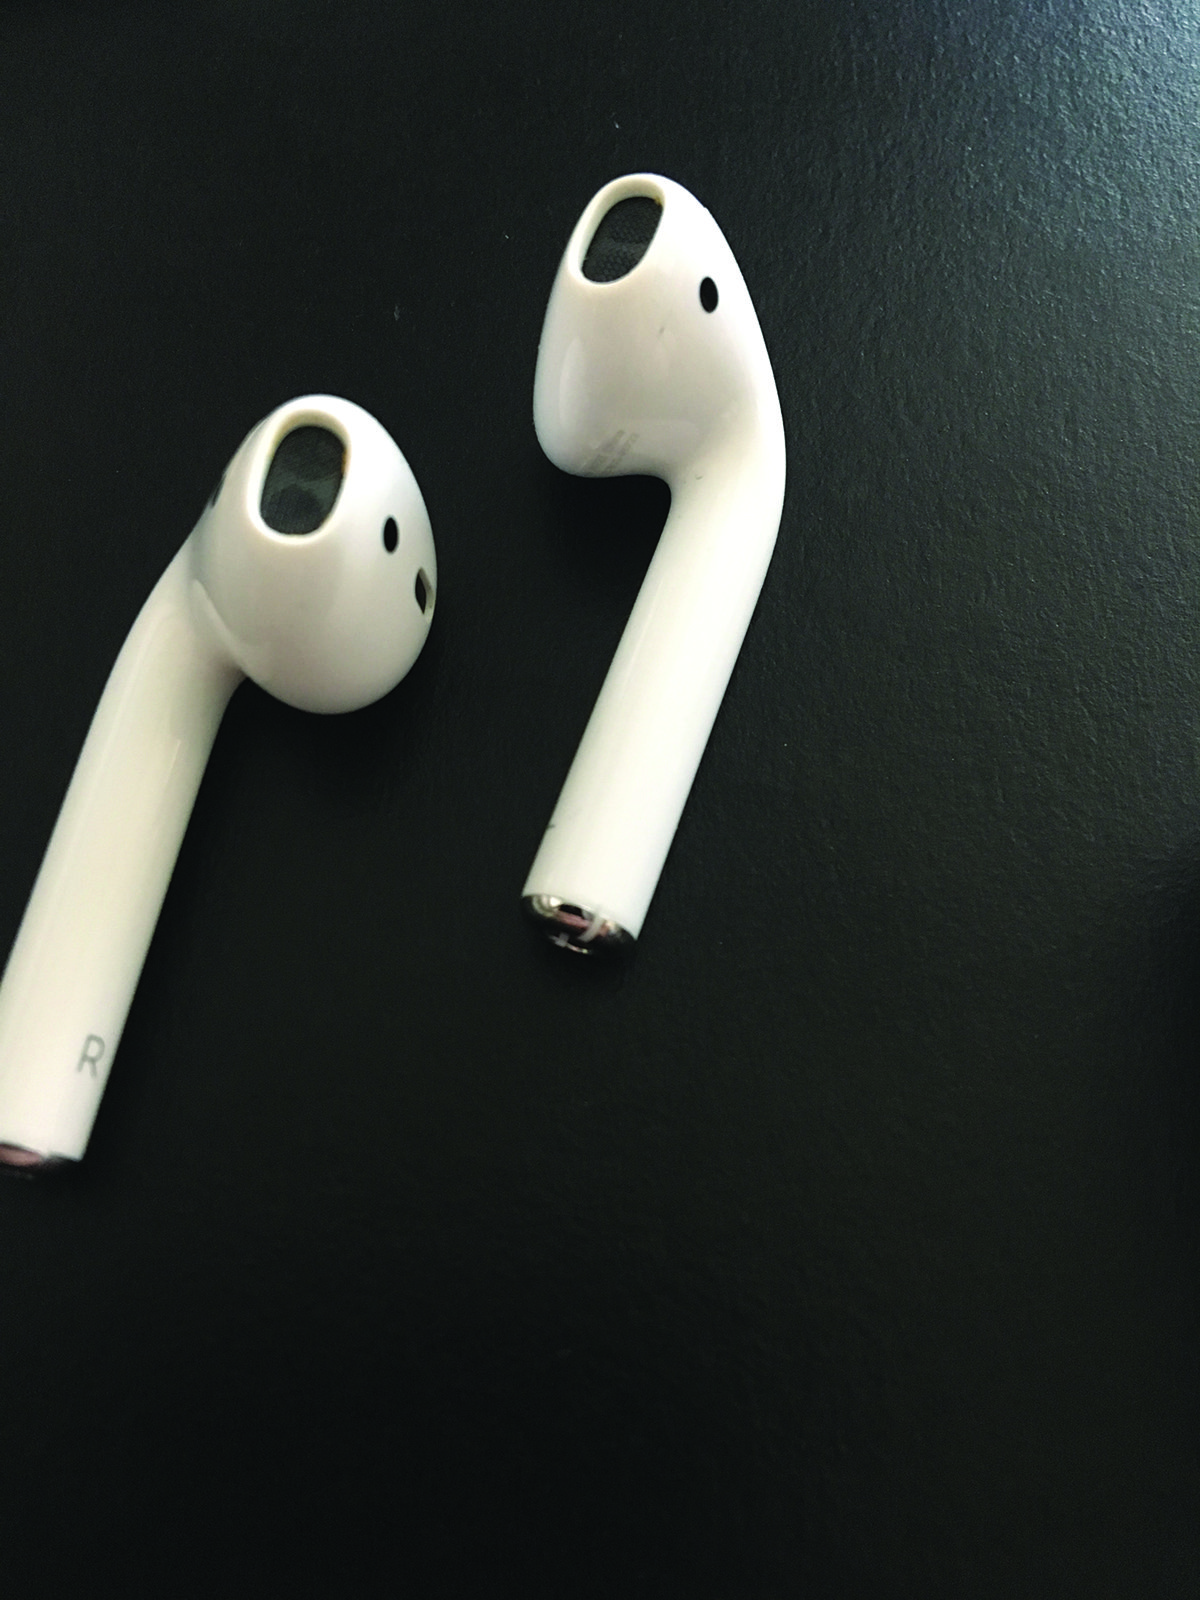 Can Apple AirPods Be Used As Hearing Aids?